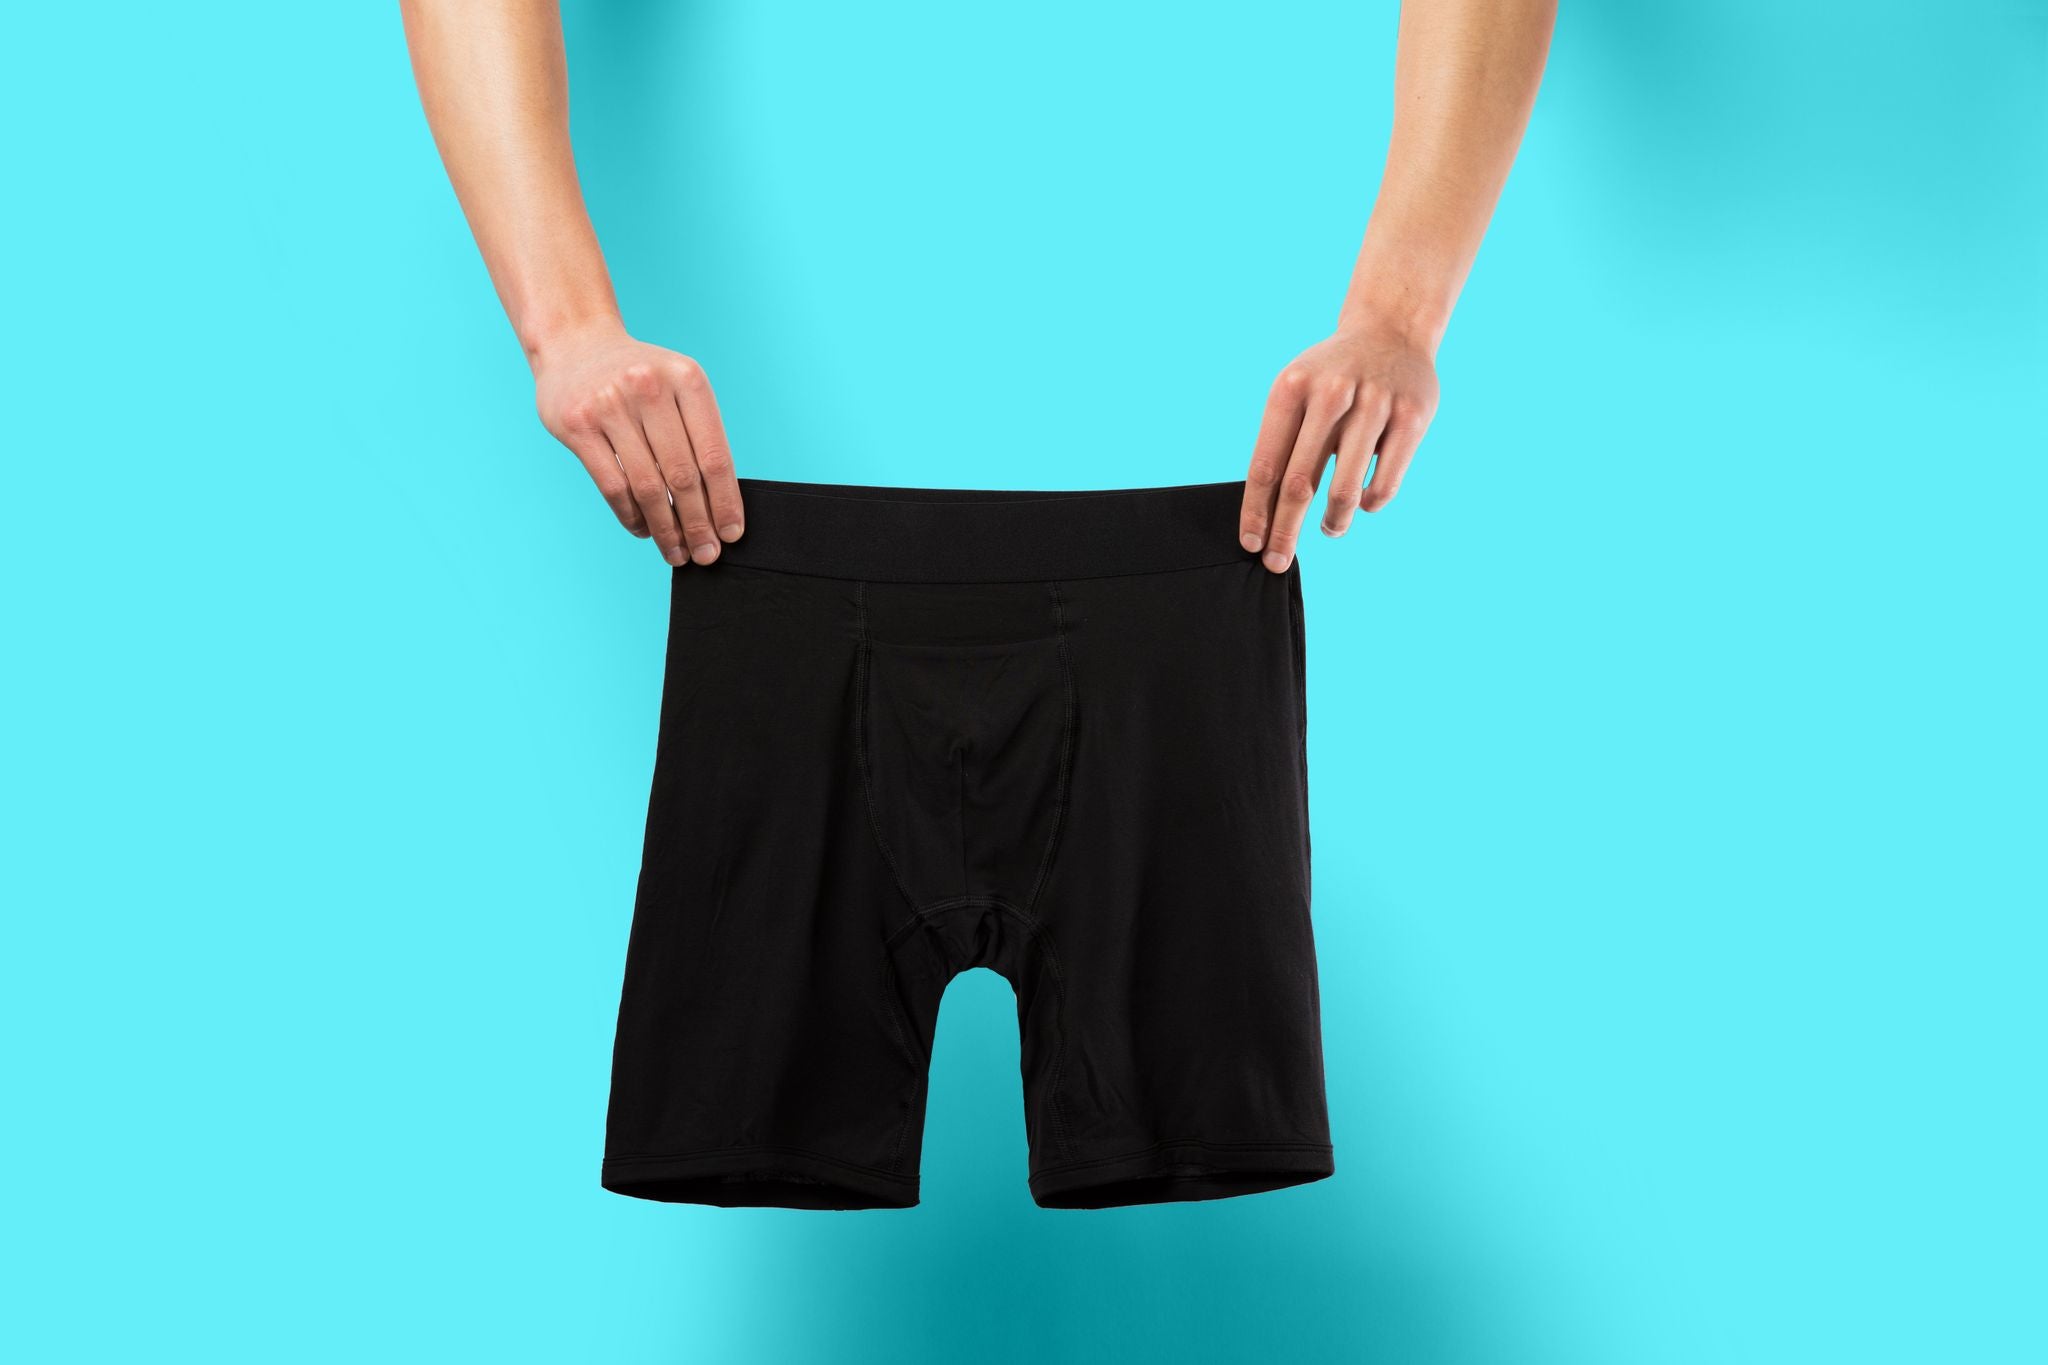 The World's Most Comfortable Men's Underwear - The Greater Goods